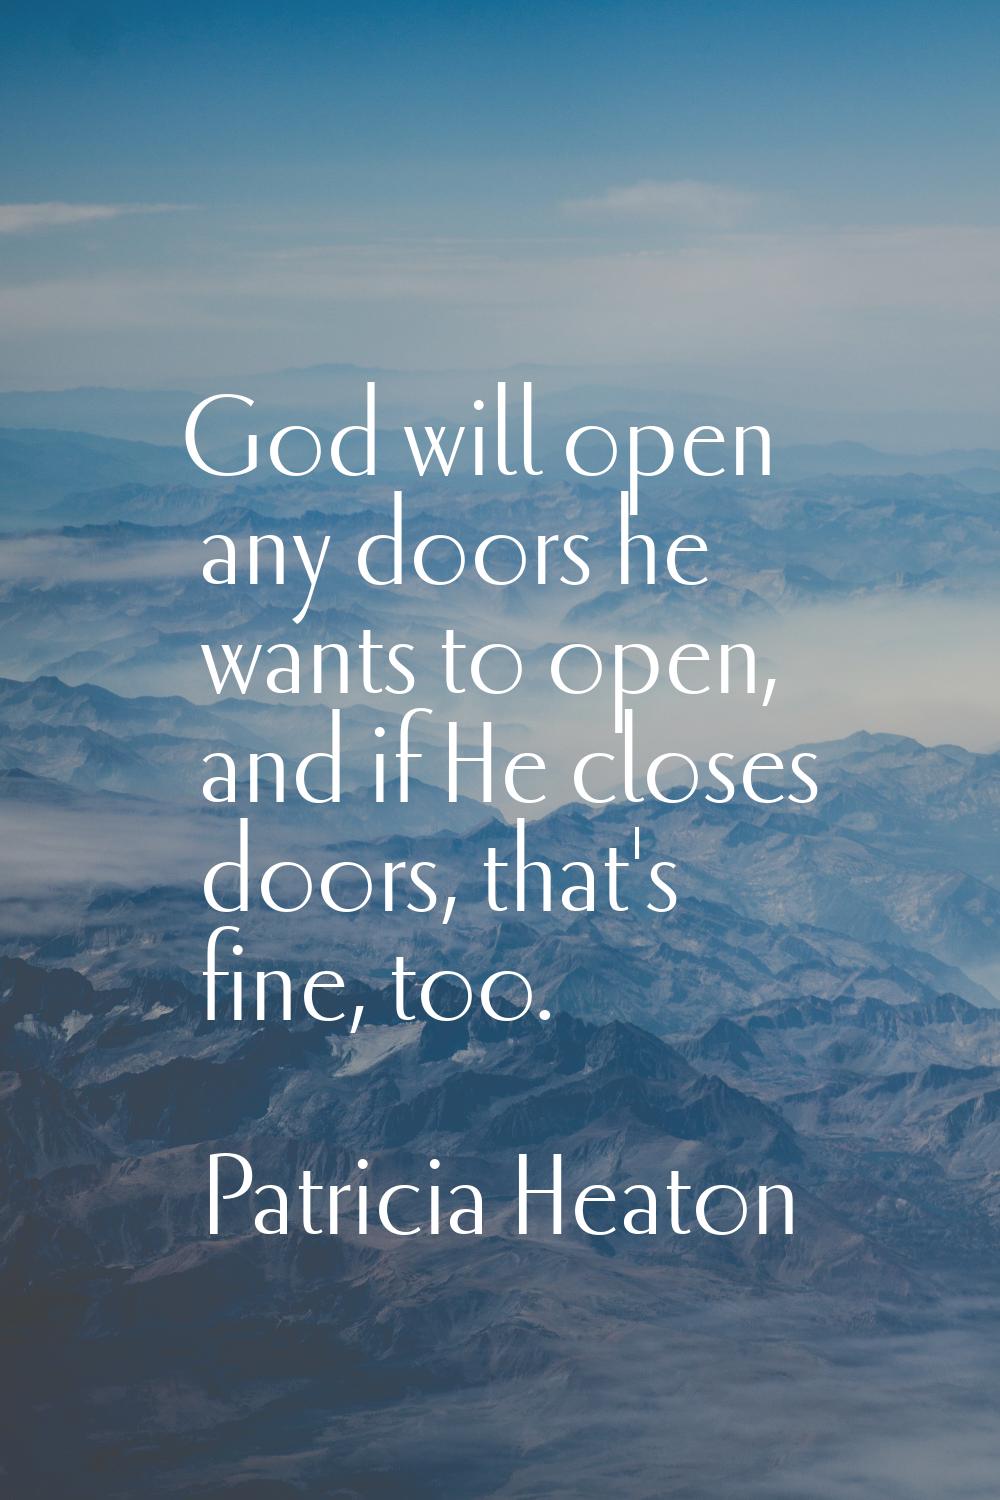 God will open any doors he wants to open, and if He closes doors, that's fine, too.